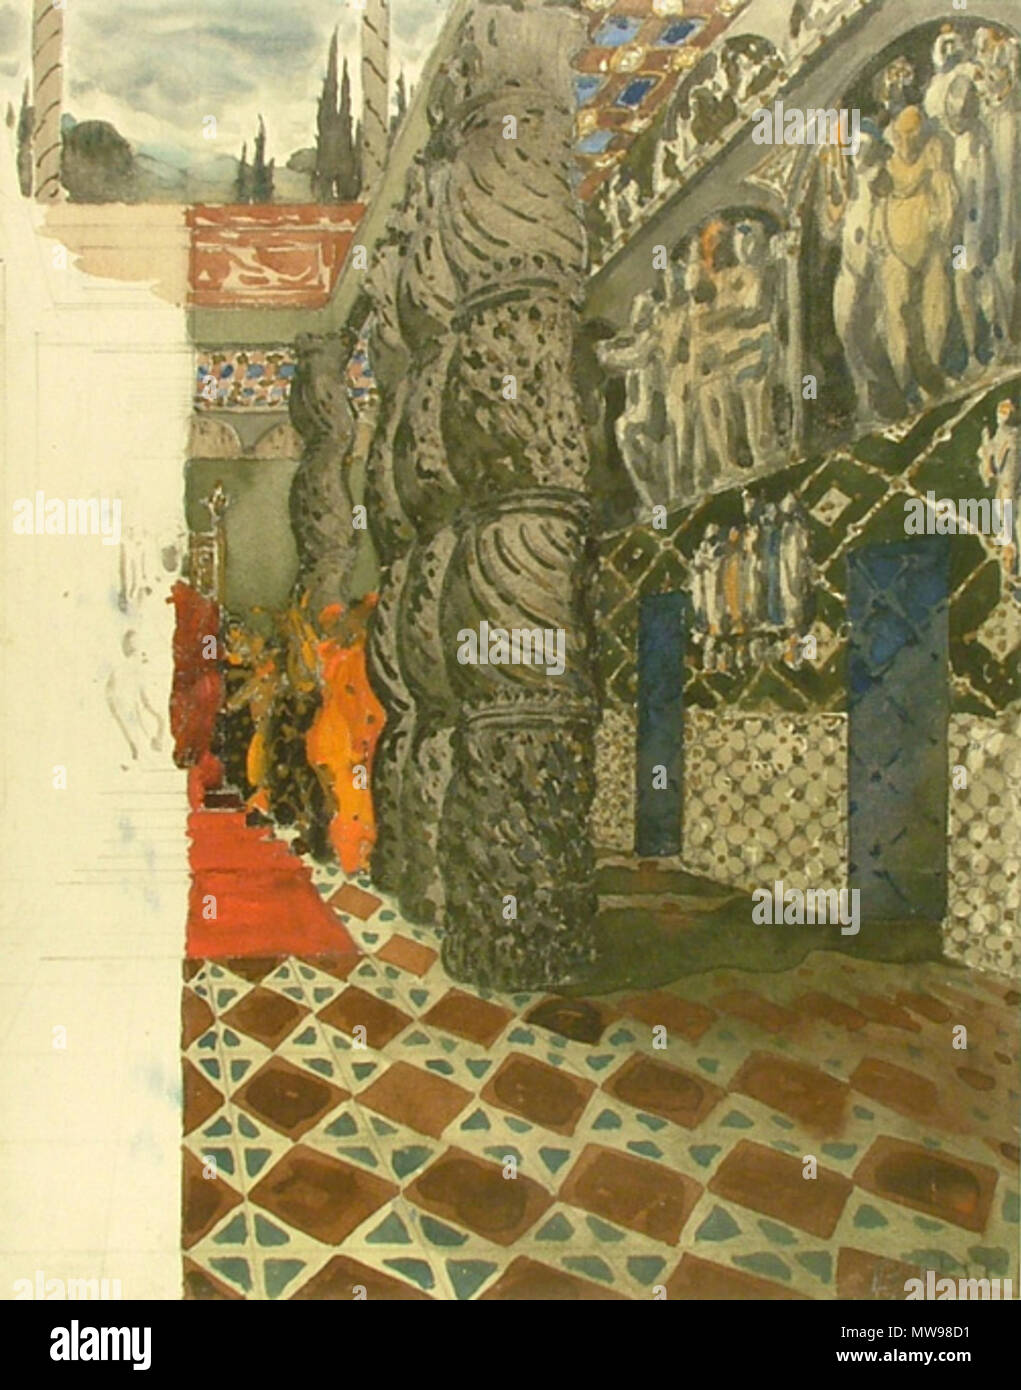 . Léon Bakst (1866 - 1924) Sketch for the Imperial Palace in 'St Sebastien' Salmina-Haskell (1989) 8. Watercolour and bodycolour with touches of gold paint over graphite on off-white paper. Sheet: 375 x 295 mm. Signed in graphite lower right: Bakst The Ashmolean Museum, Oxford. Bequeathed by Mikhail Vasil'evich Braikevitch, 1949; WA1949.378. 20th century. Bakst 400 Marthyre de S. Sebastien by L. Bakst 13 Stock Photo